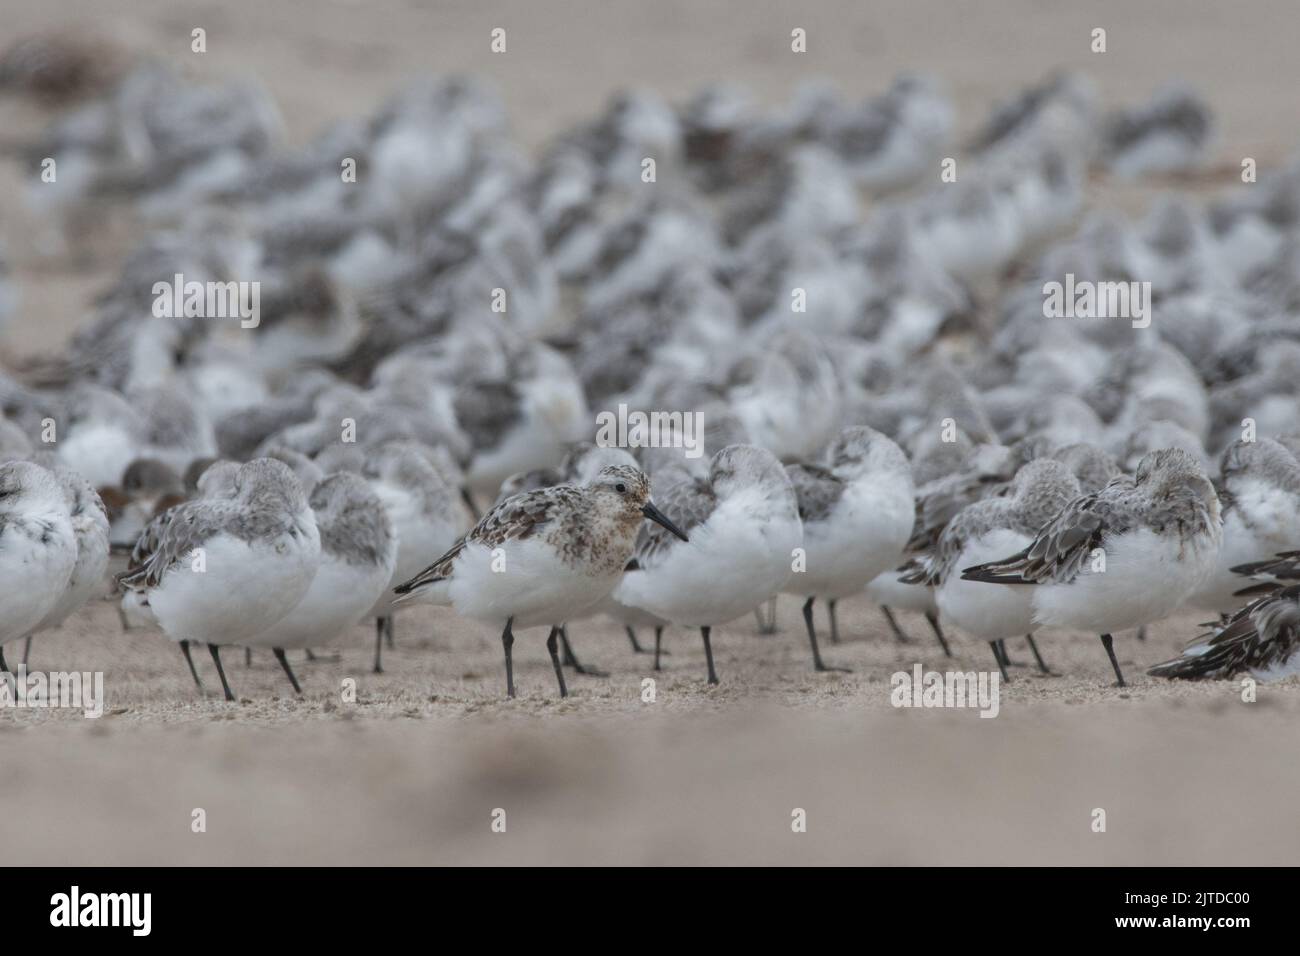 A flock of dunlin (Calidris alpina) on the beach in Point Reyes National seashore in Northern California, USA. Stock Photo